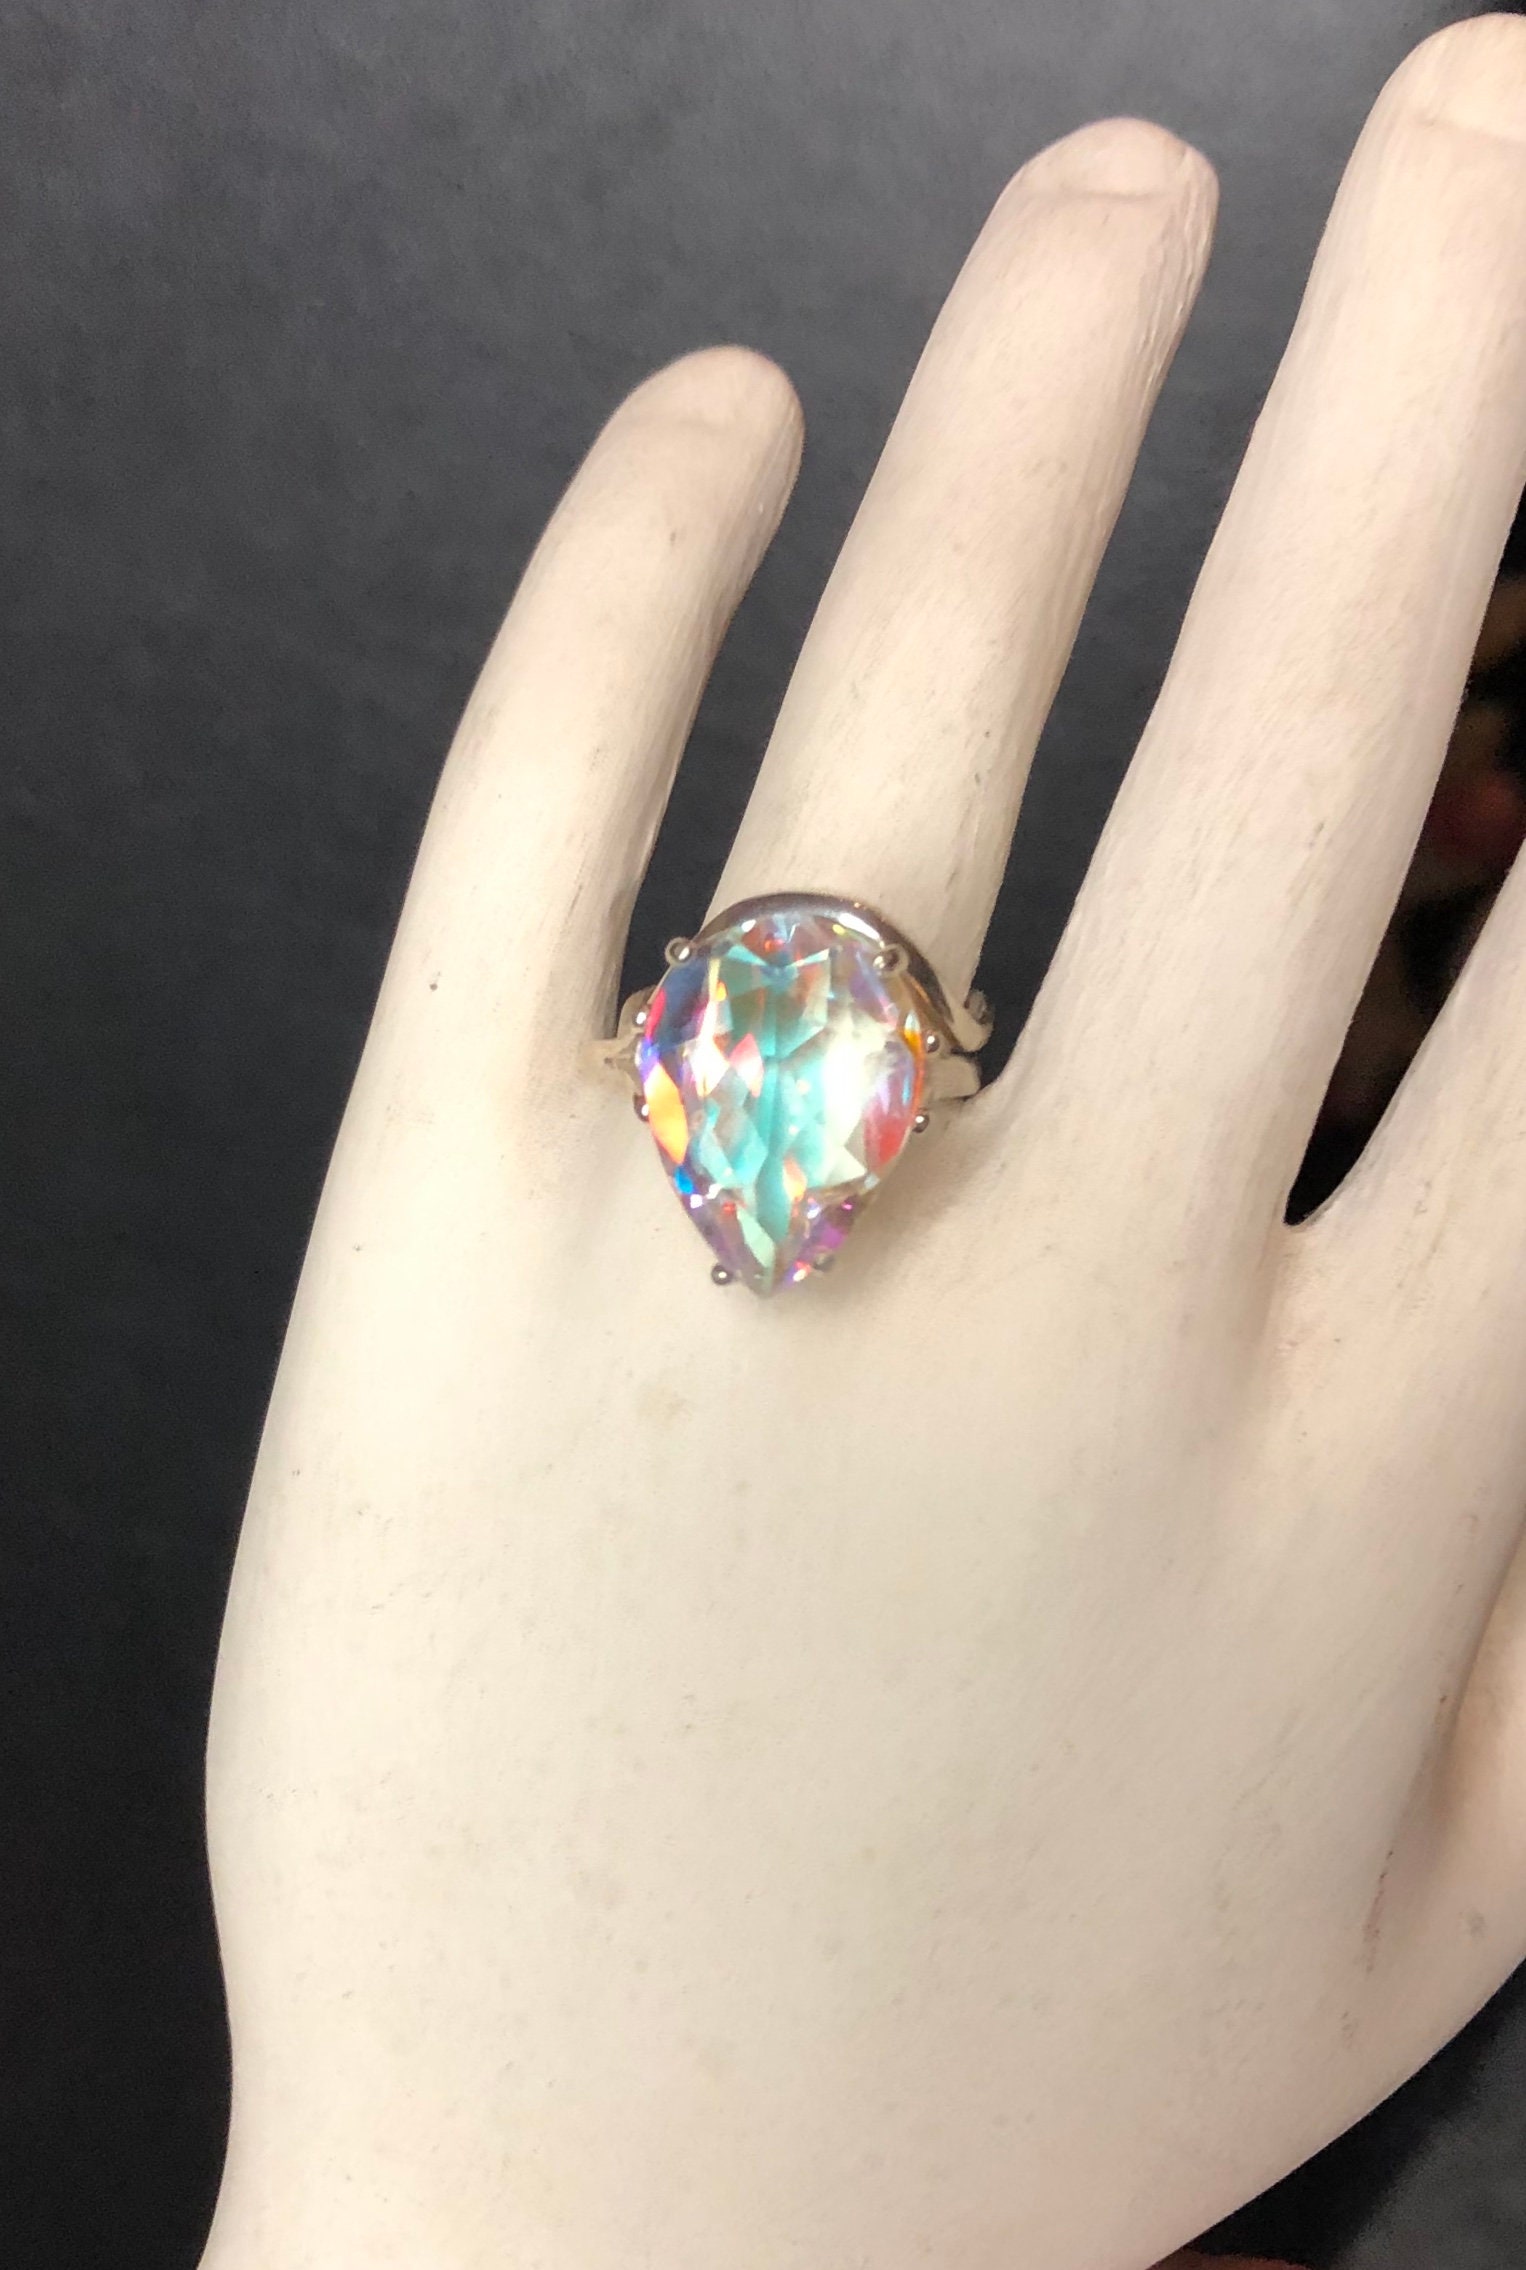 Luxe Jewelry Designs Stainless Steel Women's Ring with Aurora Borealis  Crystals - Size 5 - Walmart.com